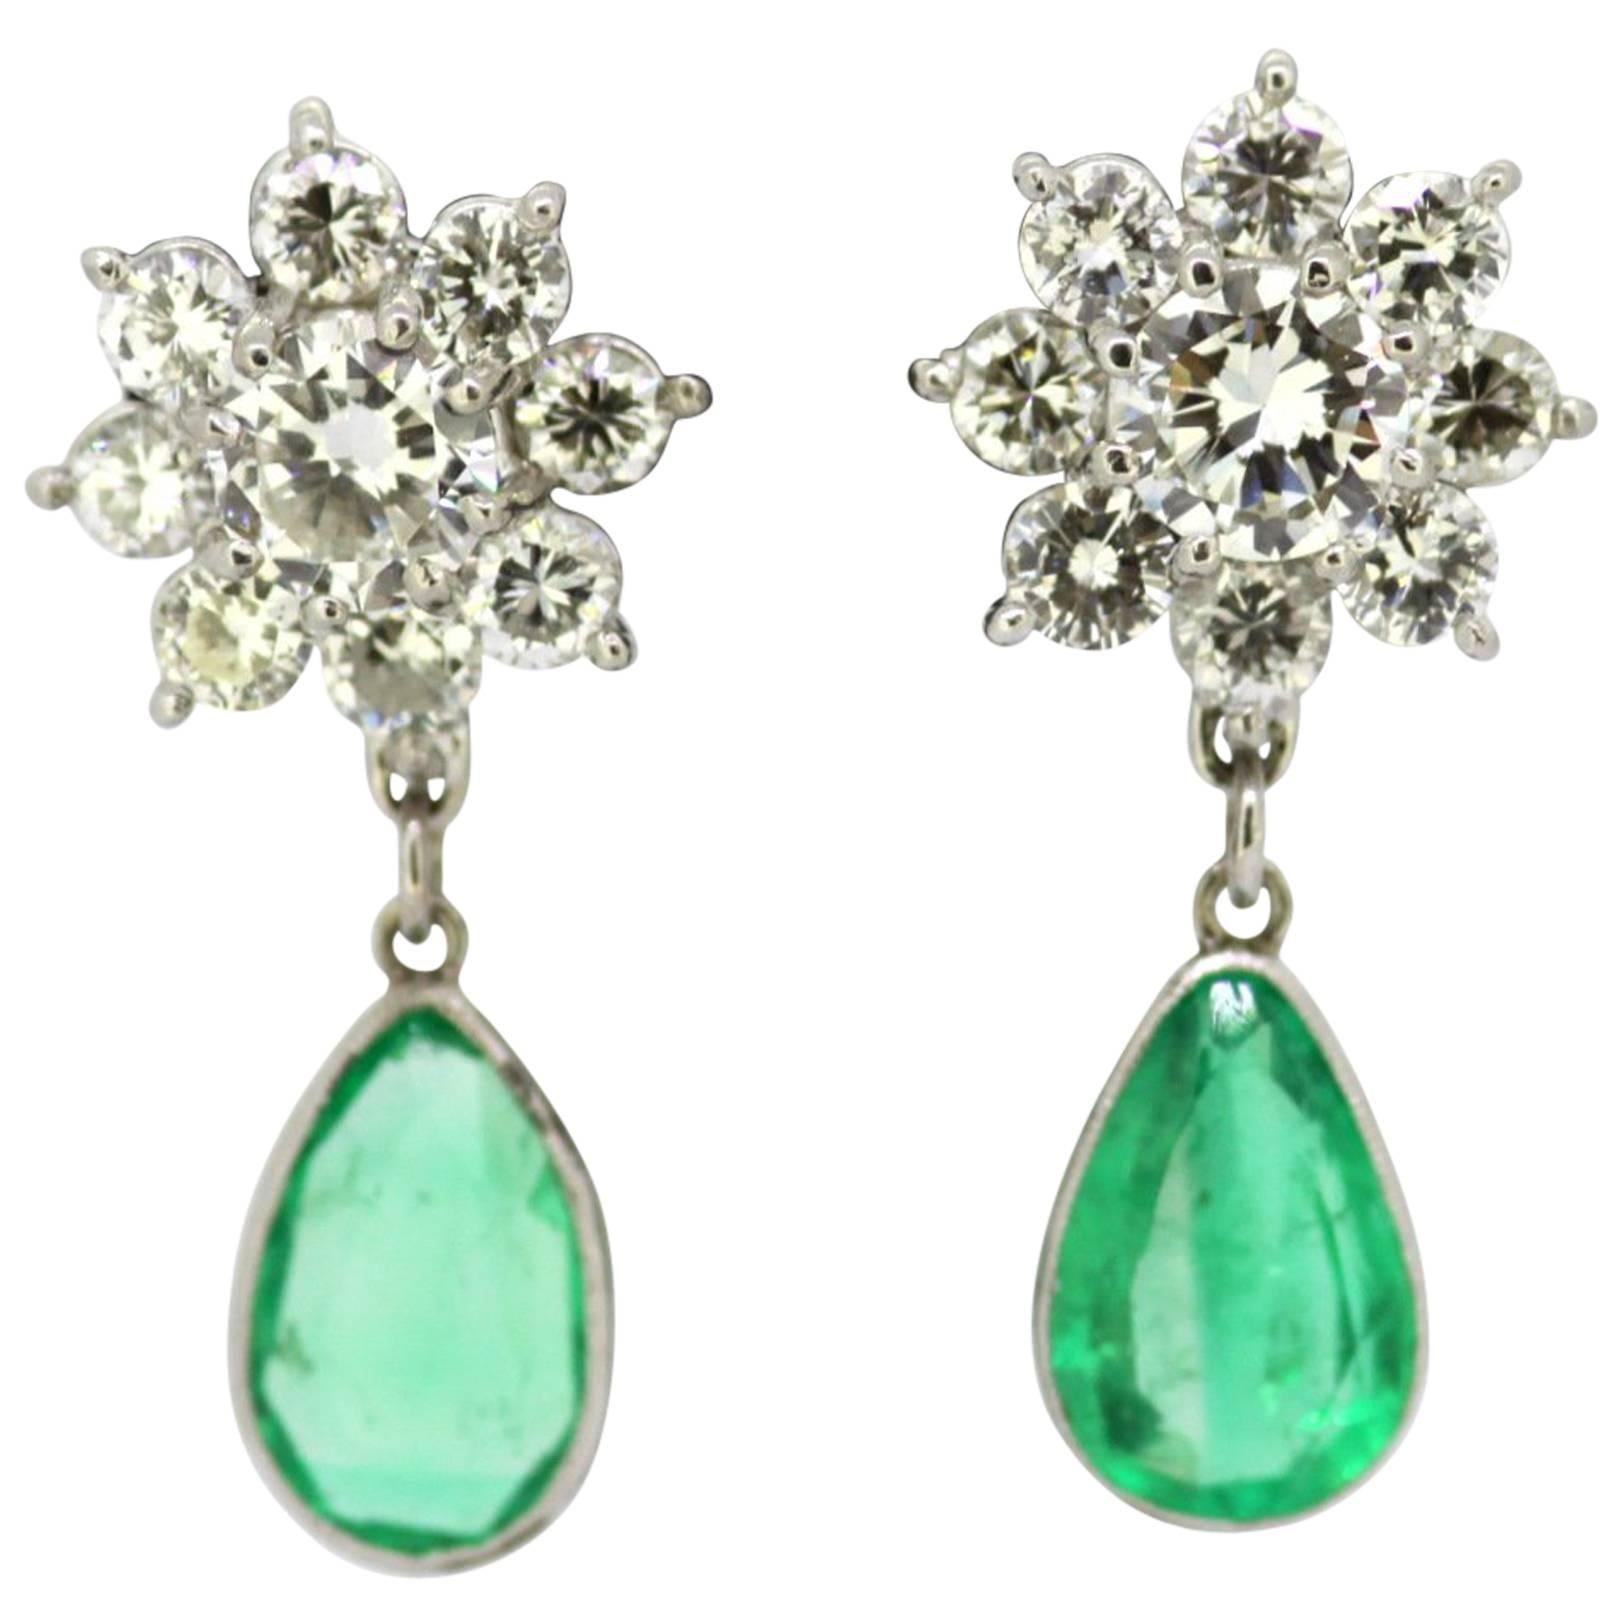 18 Karat White Gold Ladies Clip-On Earrings with Diamonds and Emerald